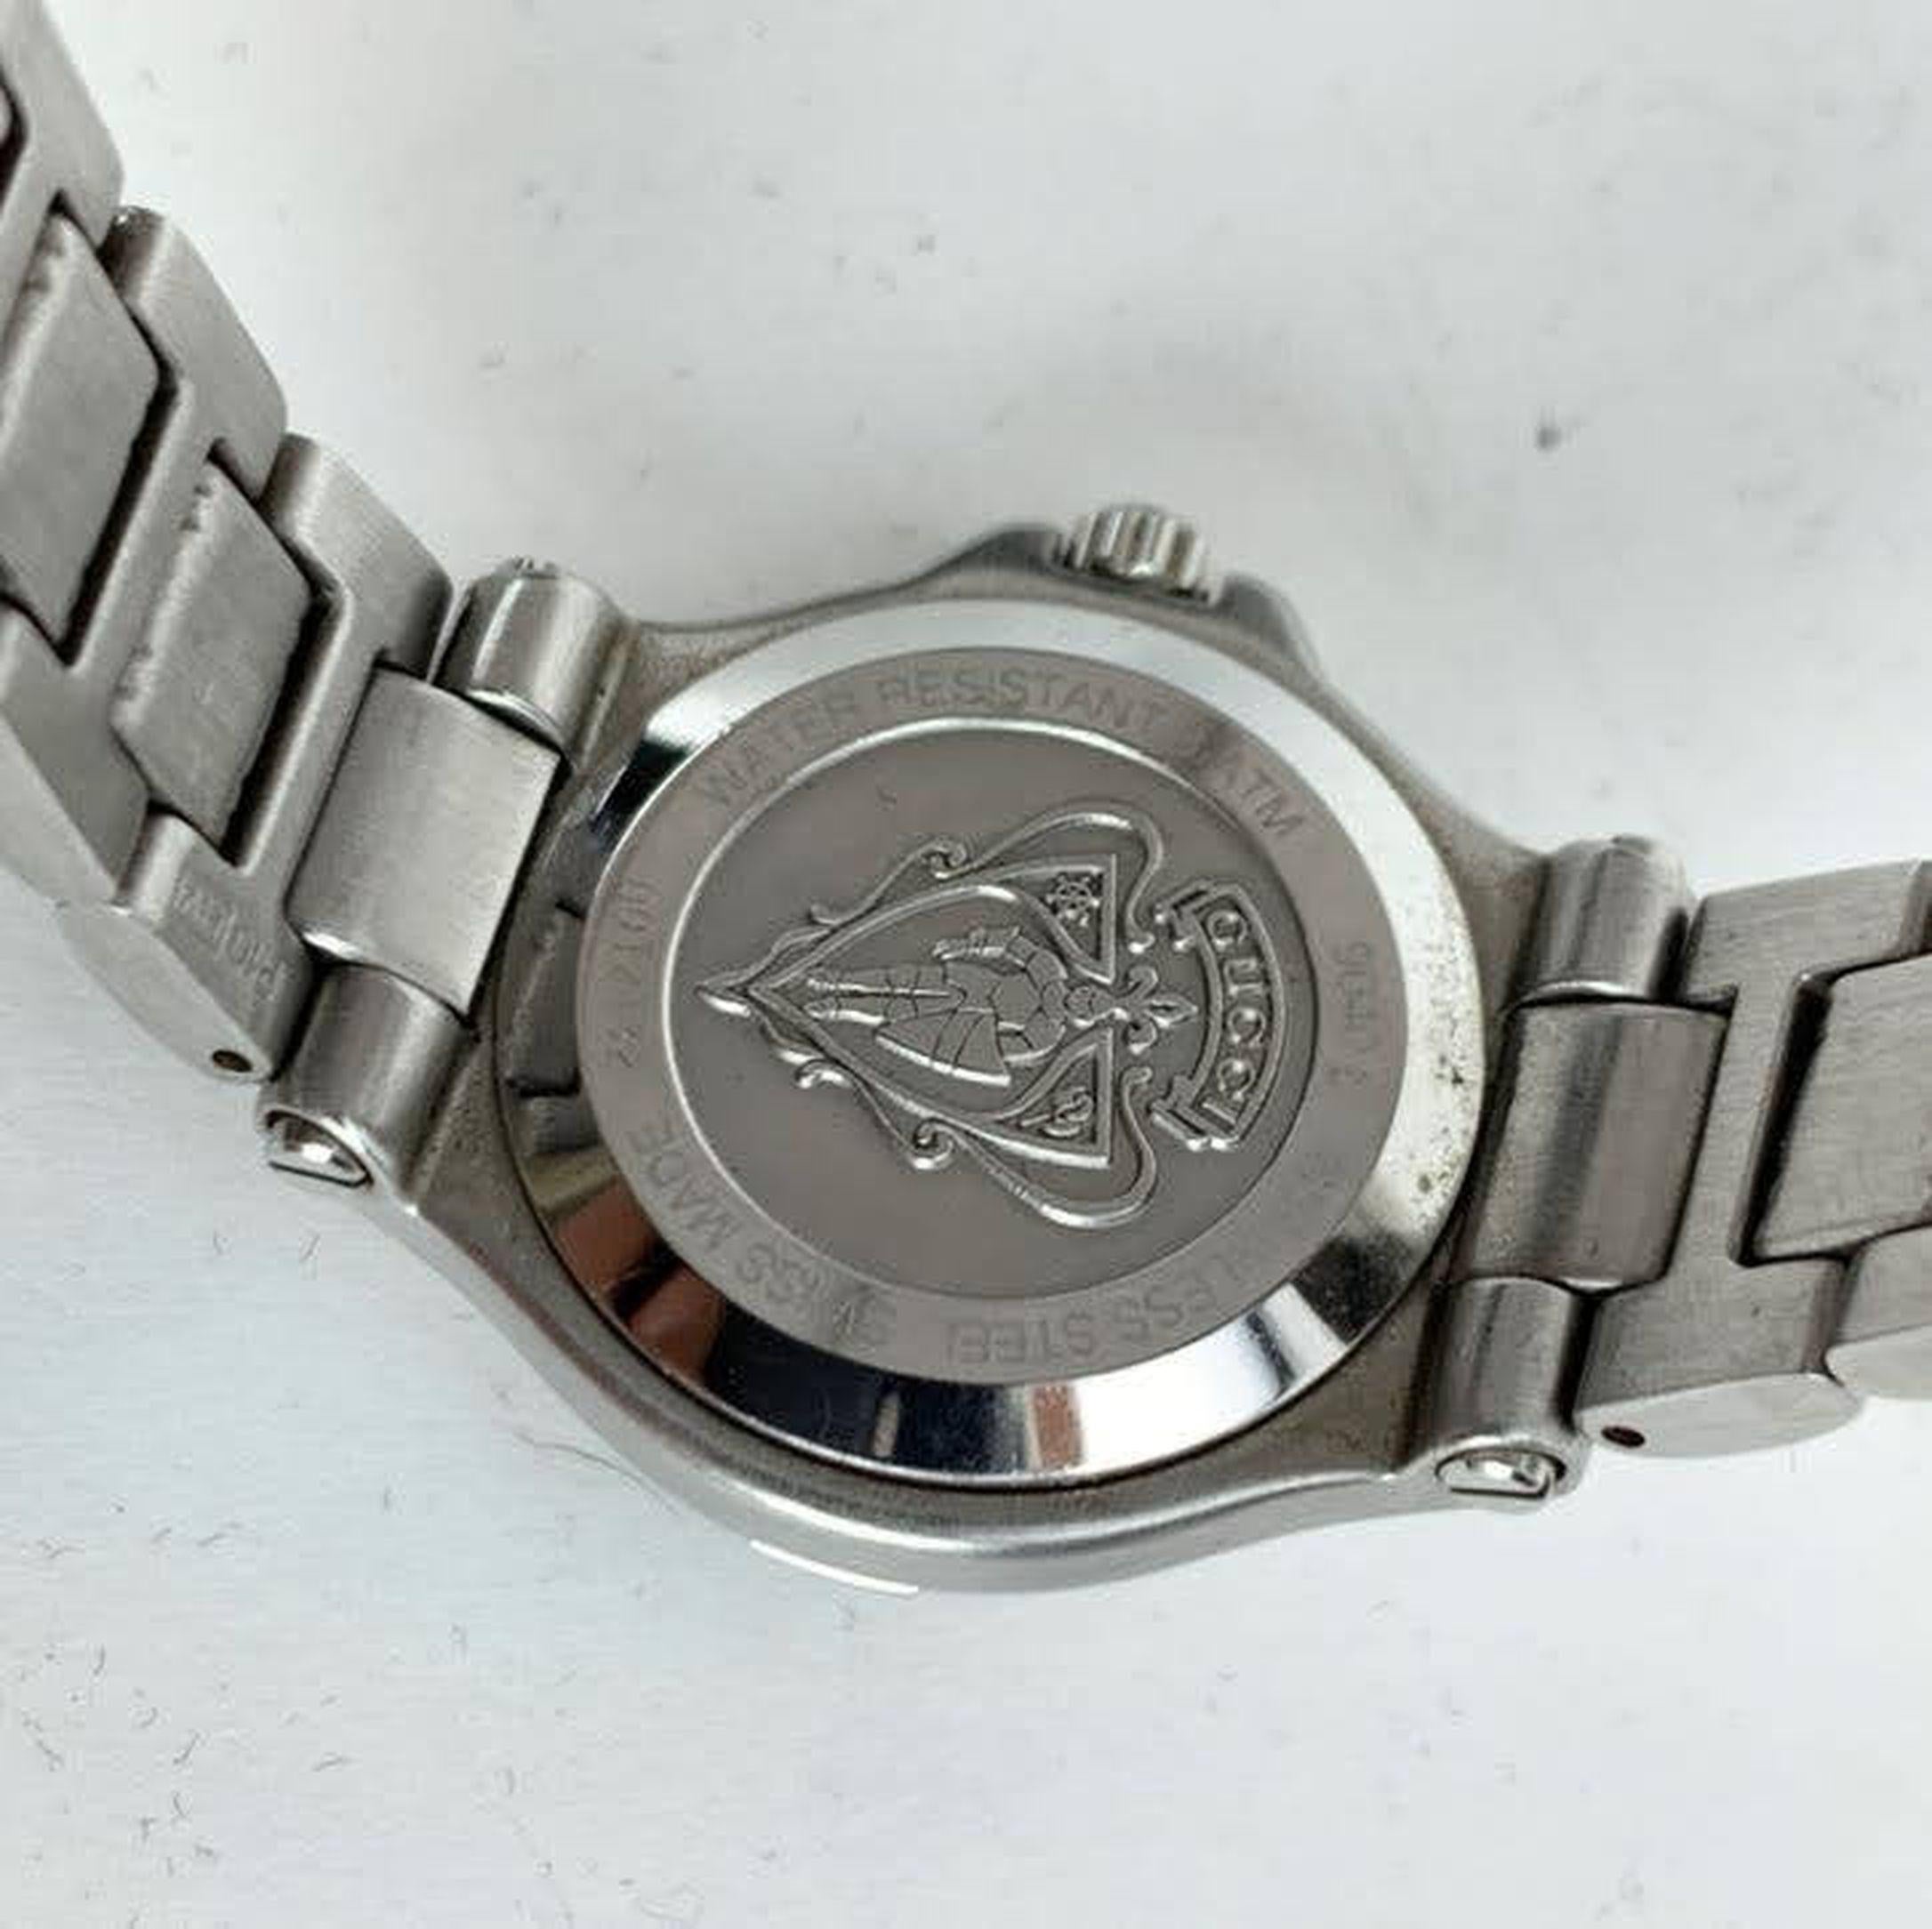 Gucci stainless steel wrist watch, mod. 9040 L. Stainless steel case. Black Dial. Date at 6 o'clock. Sapphire crystal. Swiss Made. Quartz movement. Gucci written on face. Gucci crest on the reverse of the case. GG logo engraved on the clasp. Water